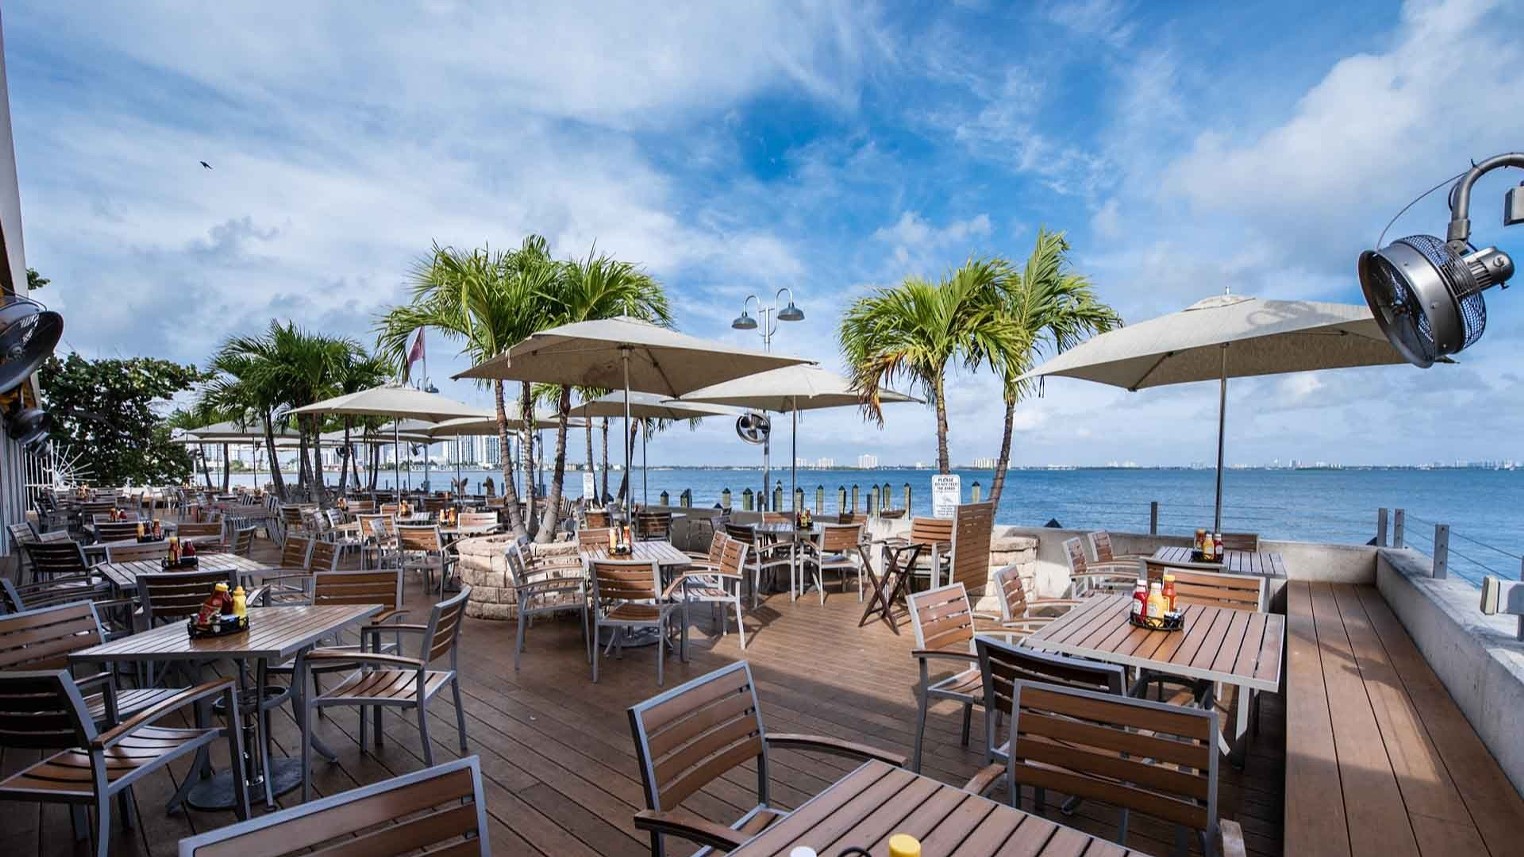 Best Outdoor Dining 2022 Shuckers Waterfront Bar and Grill Best Restaurants, Bars, Clubs, Music and Stores in Miami Miami New Times picture